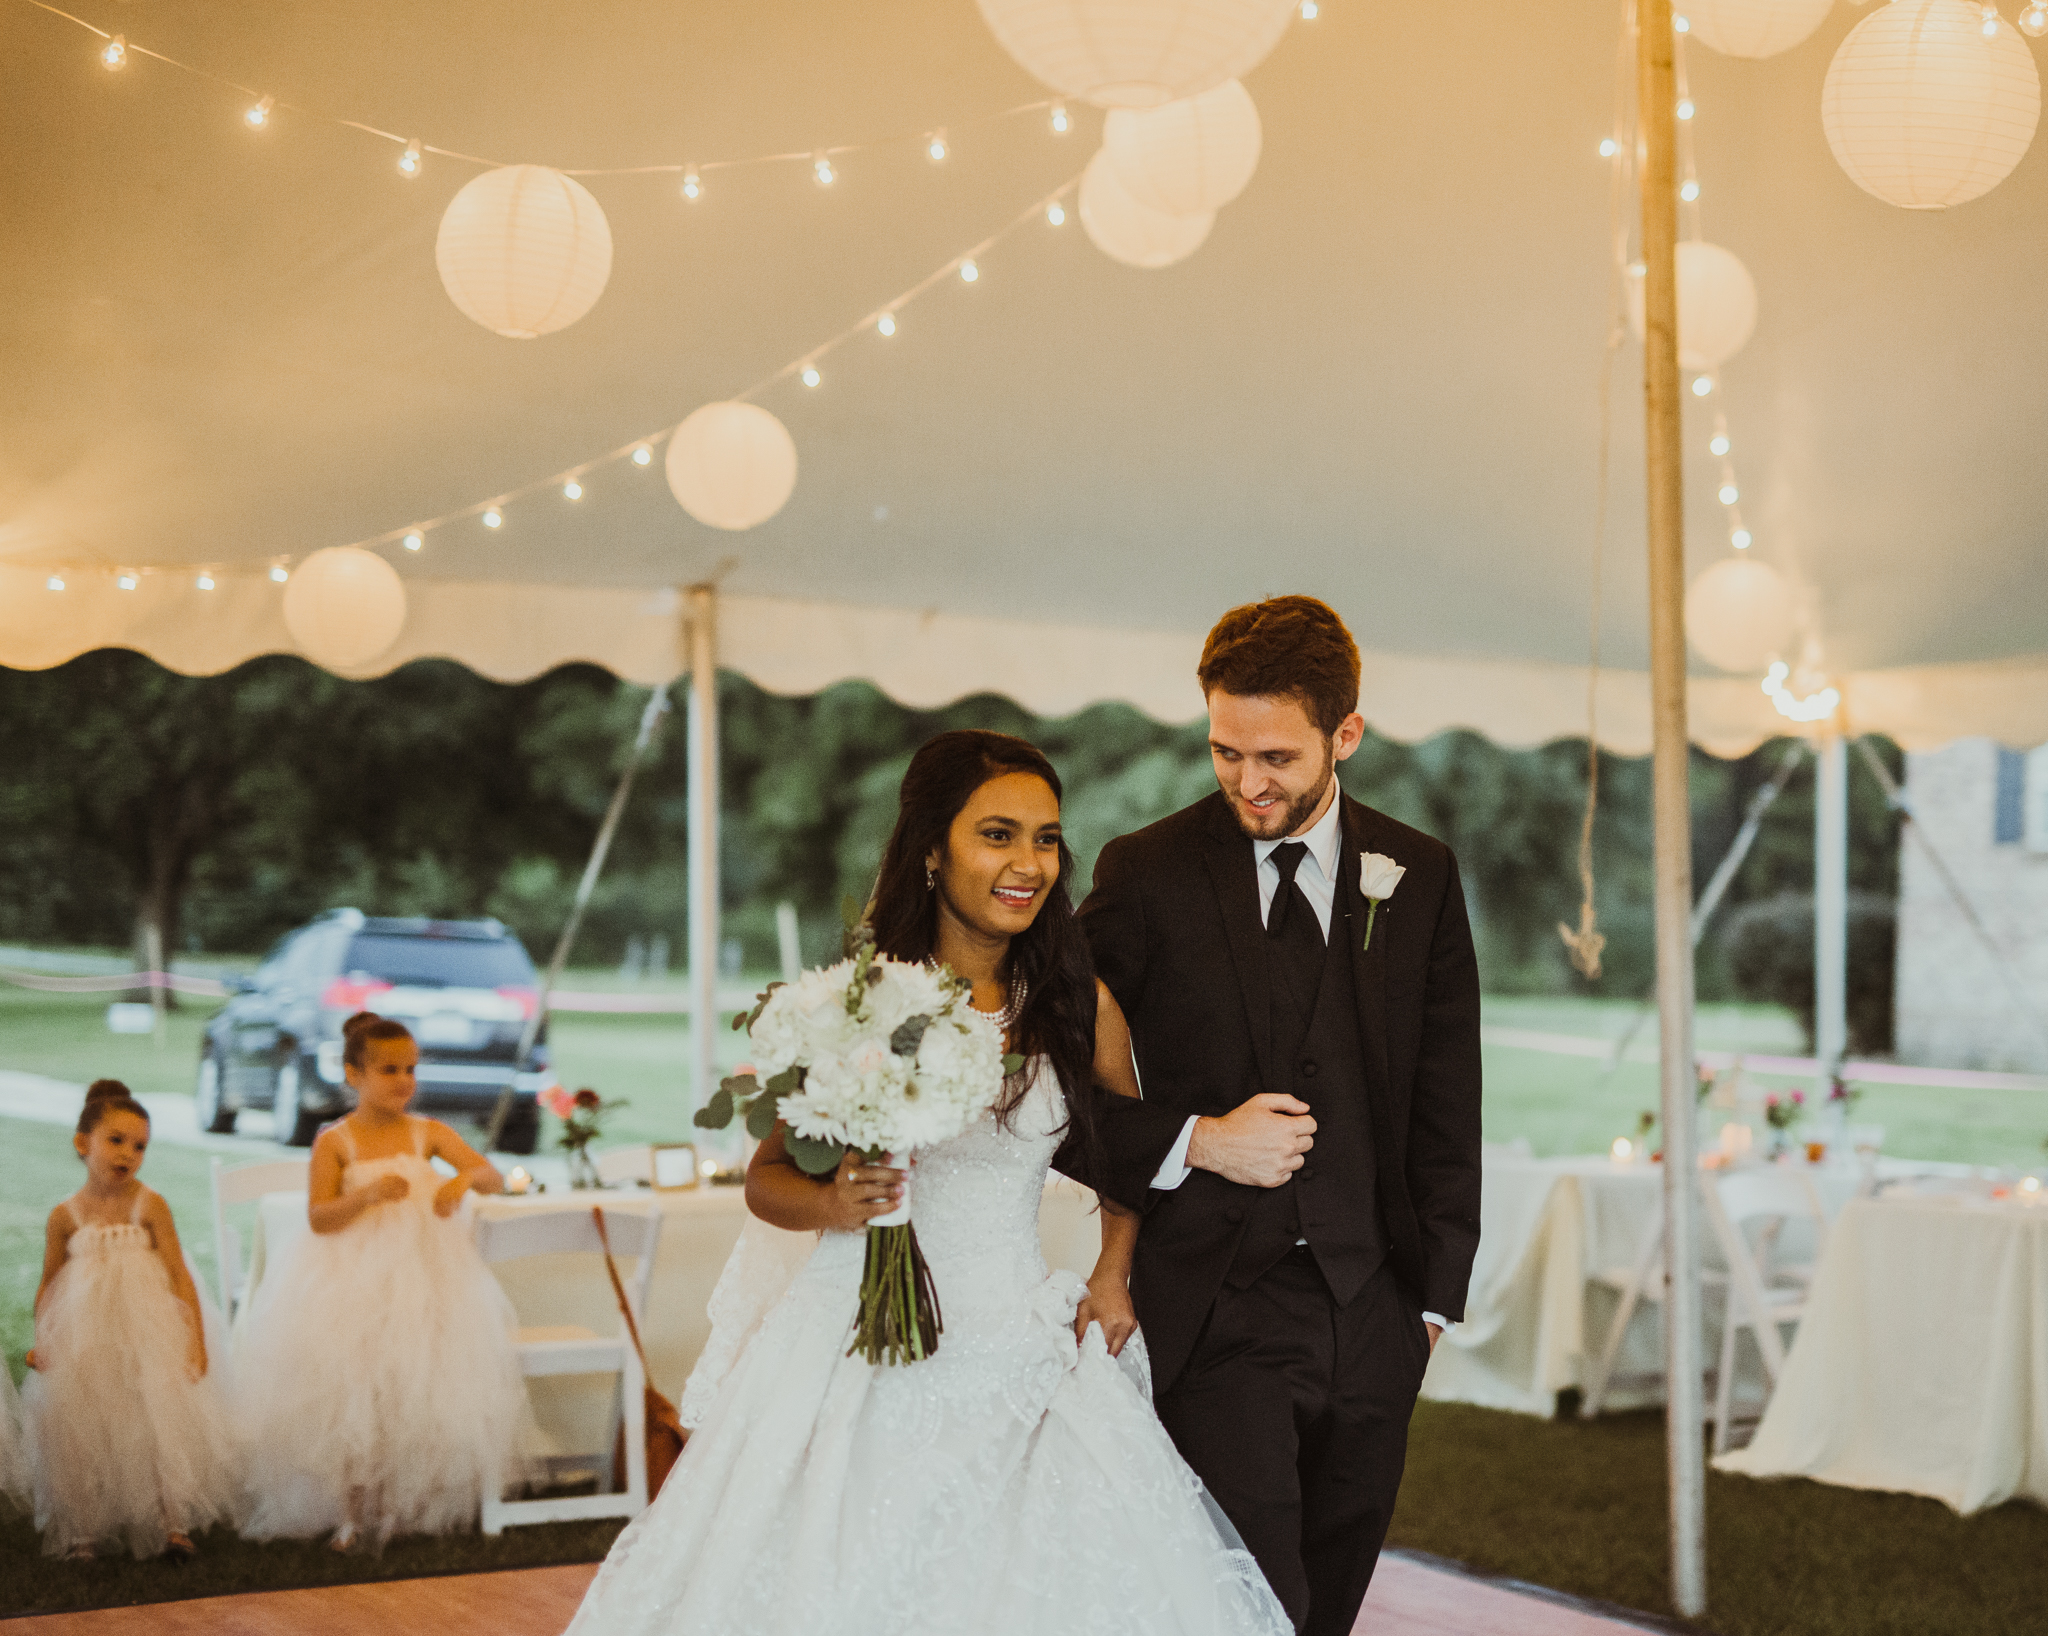 ©Isaiah & Taylor Photography - Lakeside Barn Wedding, Private Estate, Poplarville Mississippi-132.jpg